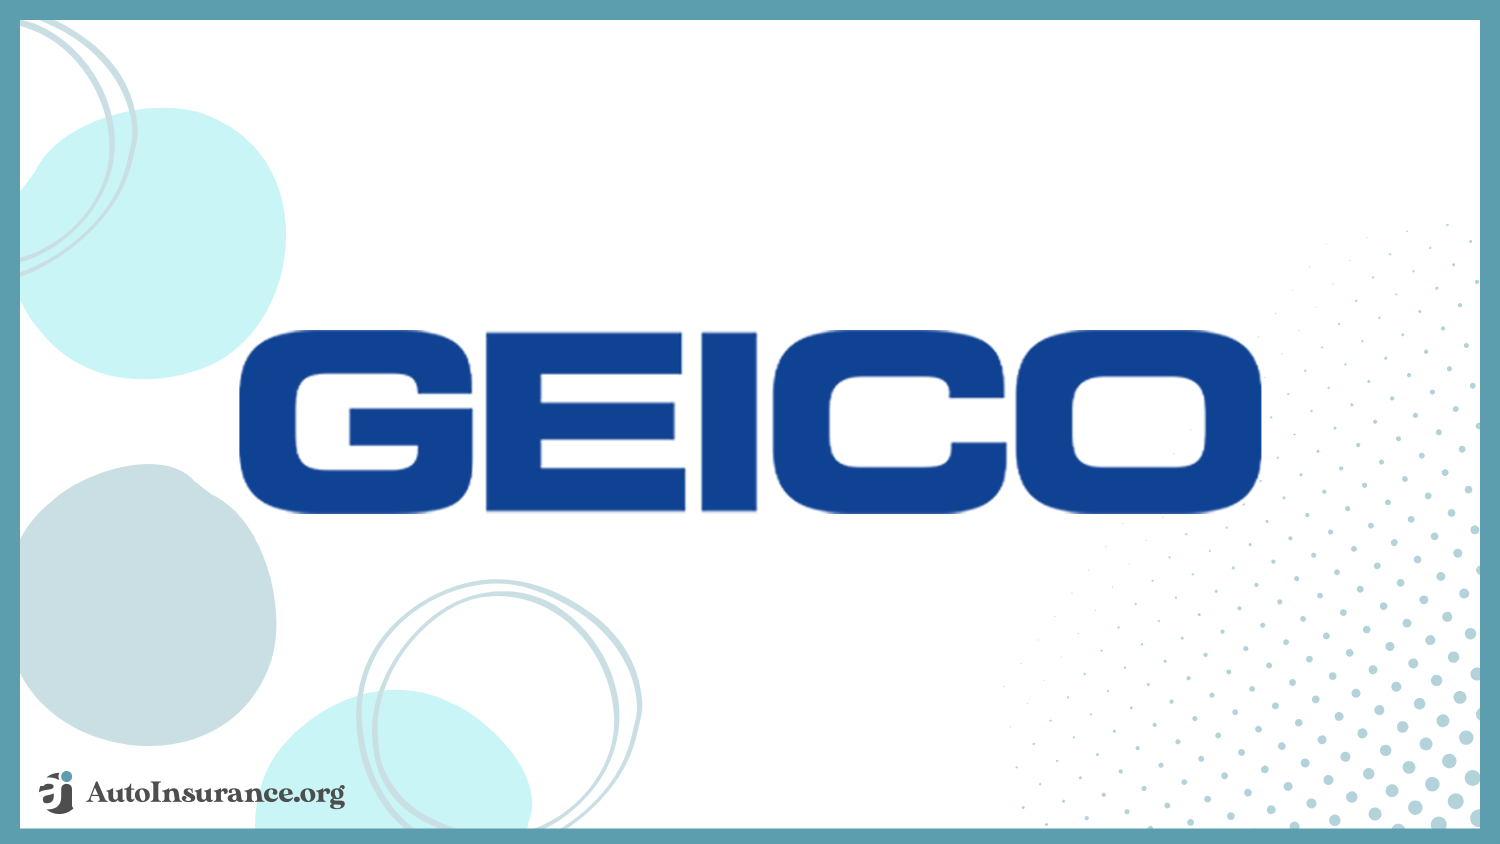 auto insurance companies with the best customer service: Geico